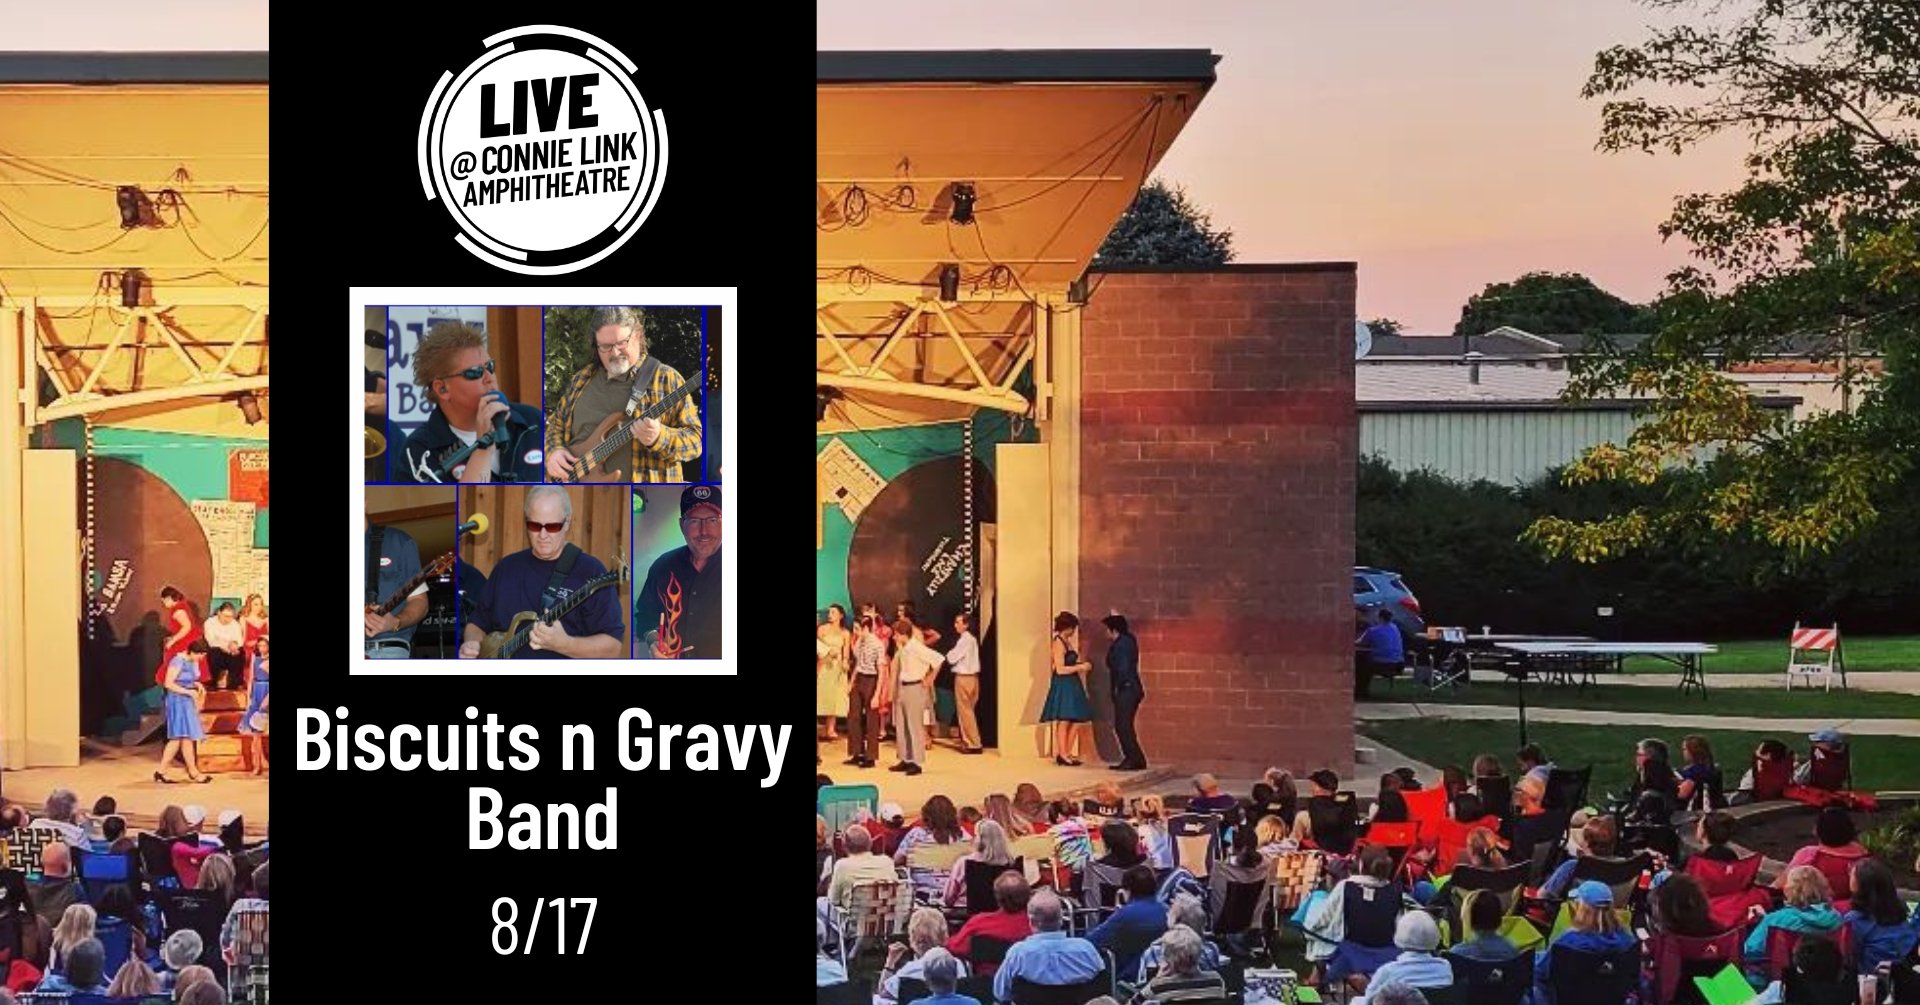 Normal LIVE presents Biscuits n Gravy Band @ Connie Link Amphitheatre